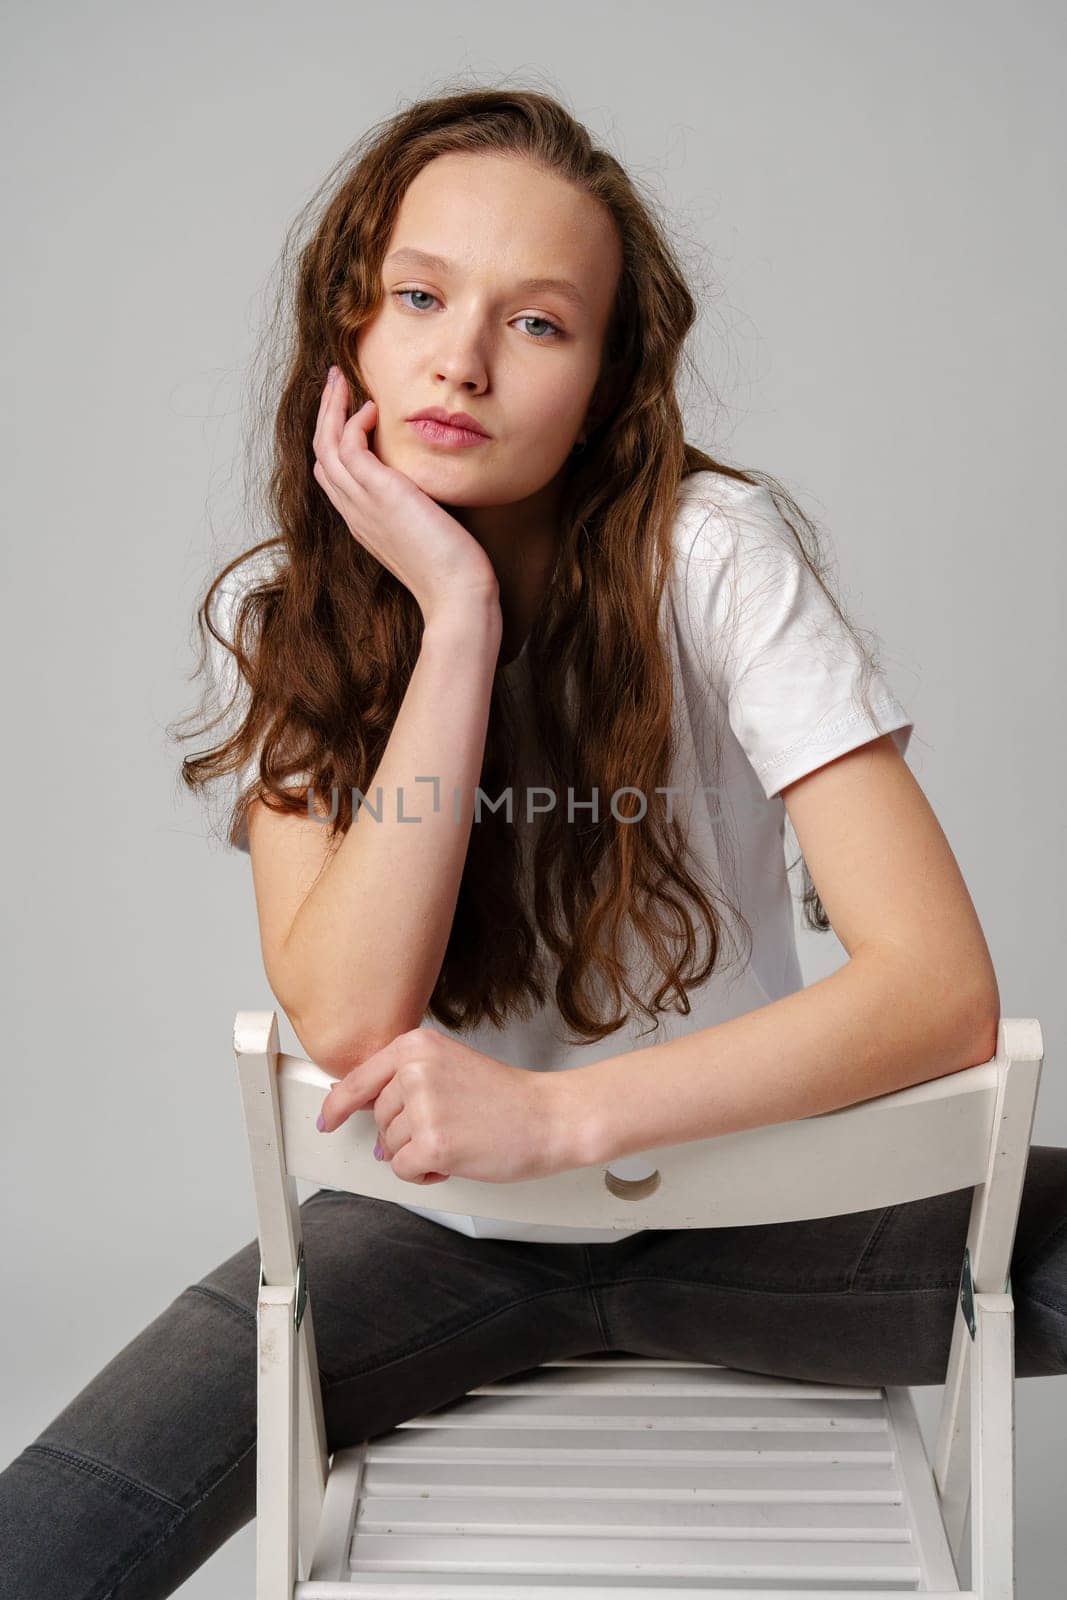 Curly girl model posing on a chair against gray background by Fabrikasimf